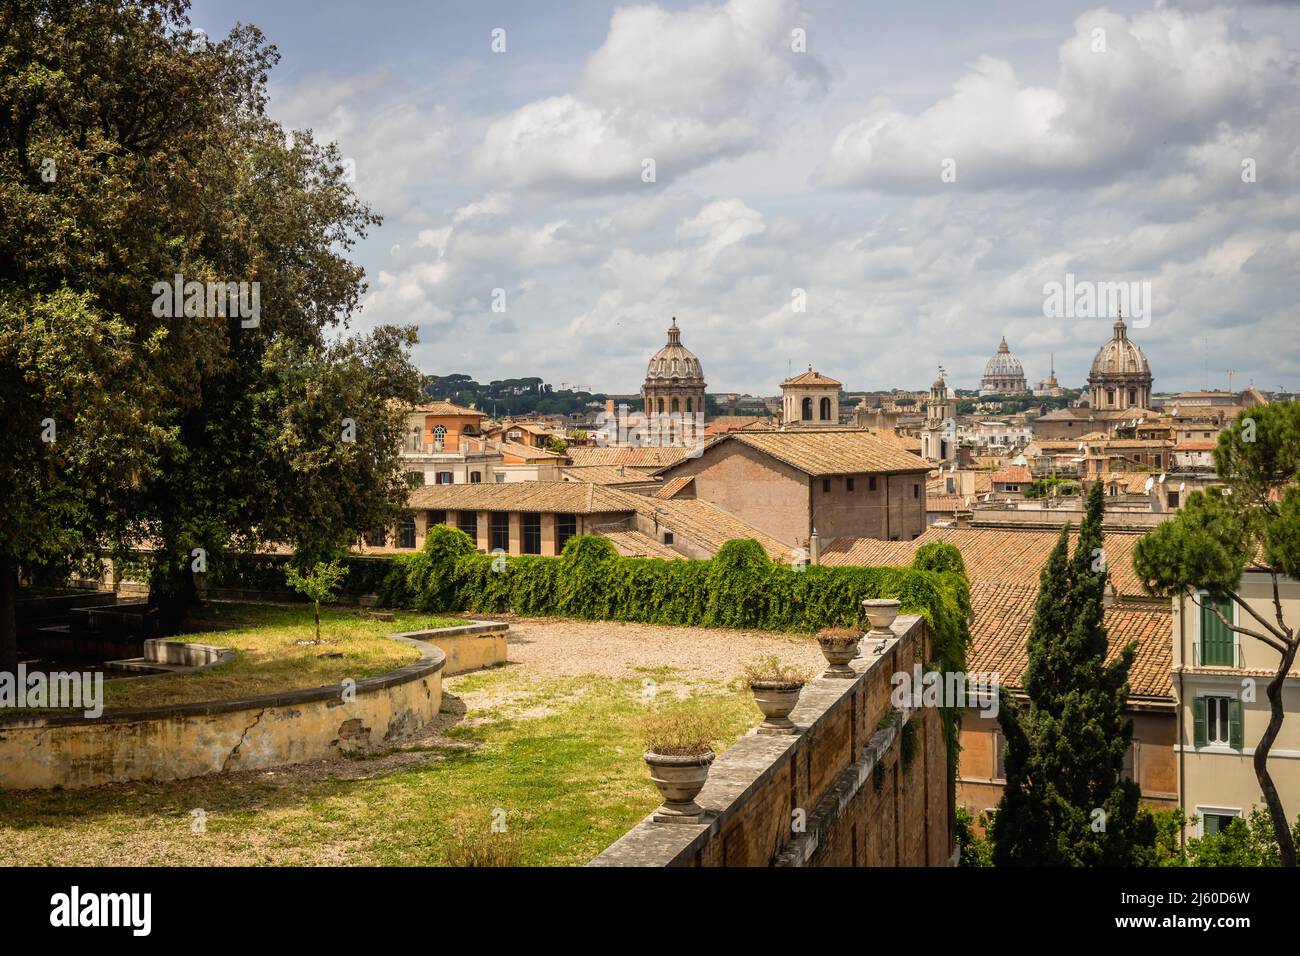 Picturesque View of Traditional Italian Skyline and Architecture in City of Rome, Italy 03 Stock Photo